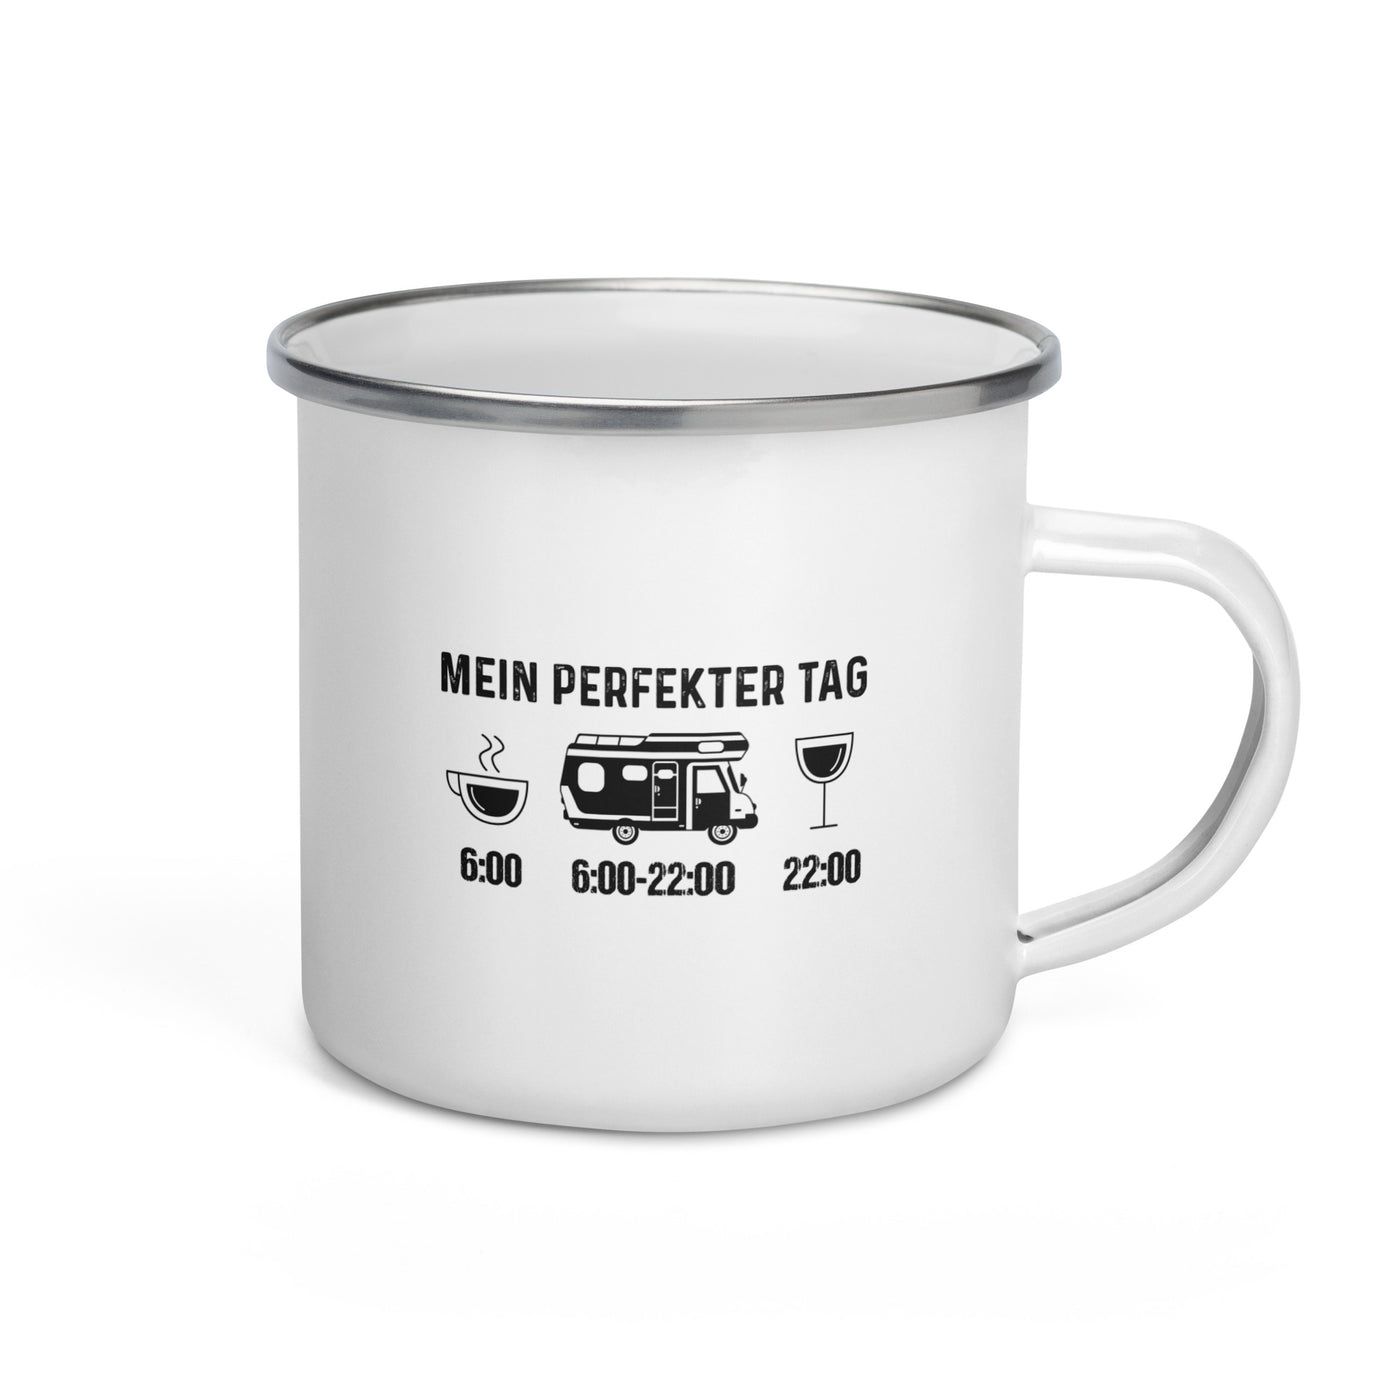 Mein Perfekter Tag - Emaille Tasse camping Default Title